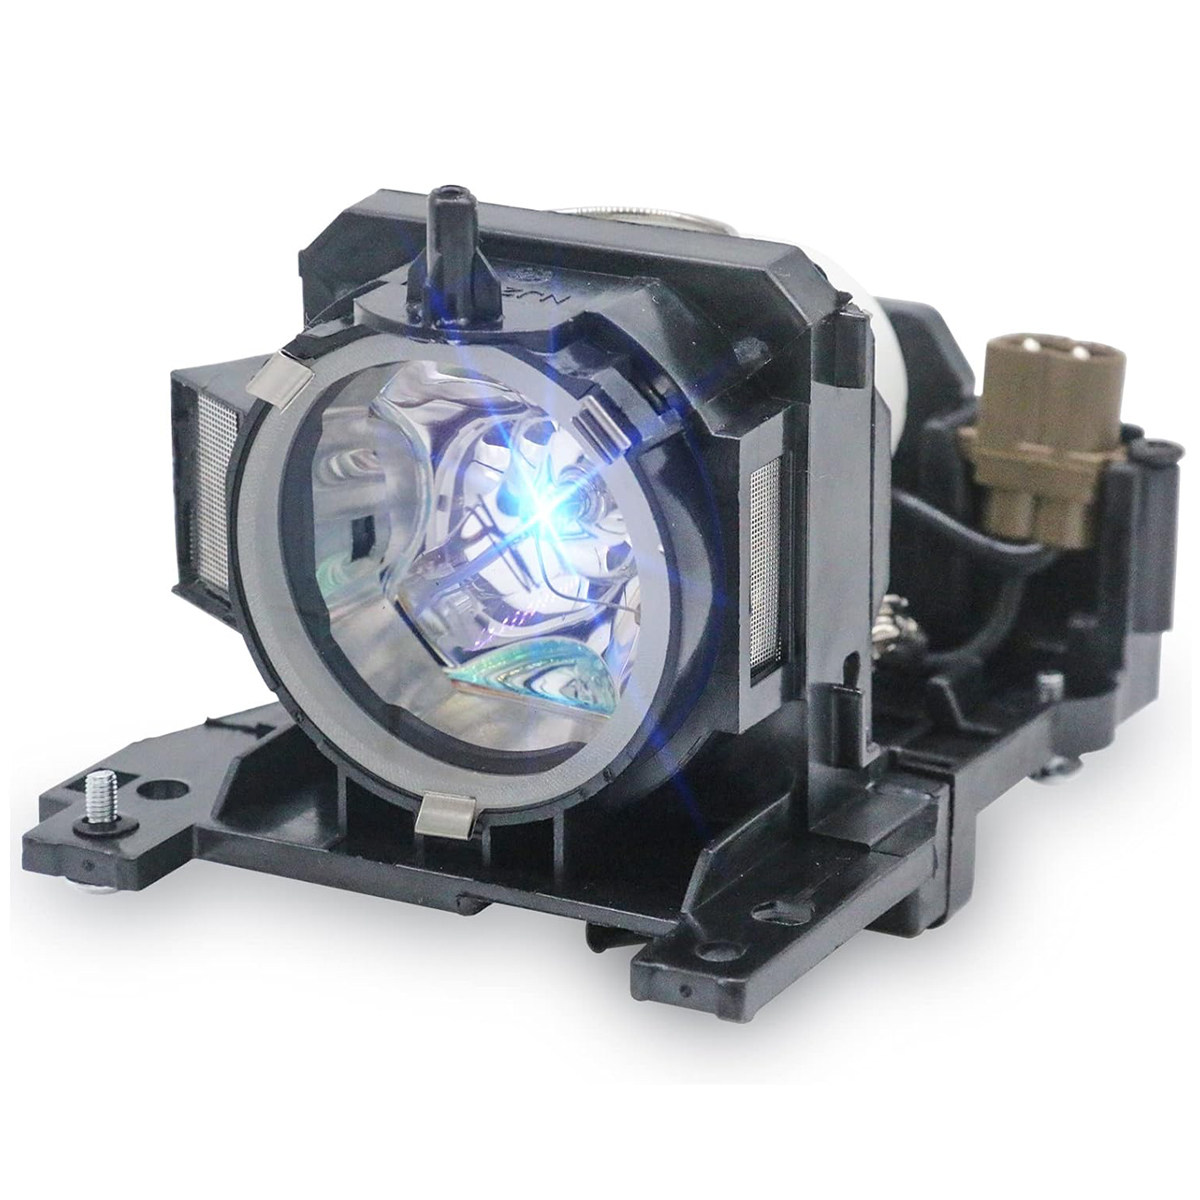 Replacement Projector lamp DT00911 For Hitachi CP-WX401 CP-WX410 CP-X201 CP-X206